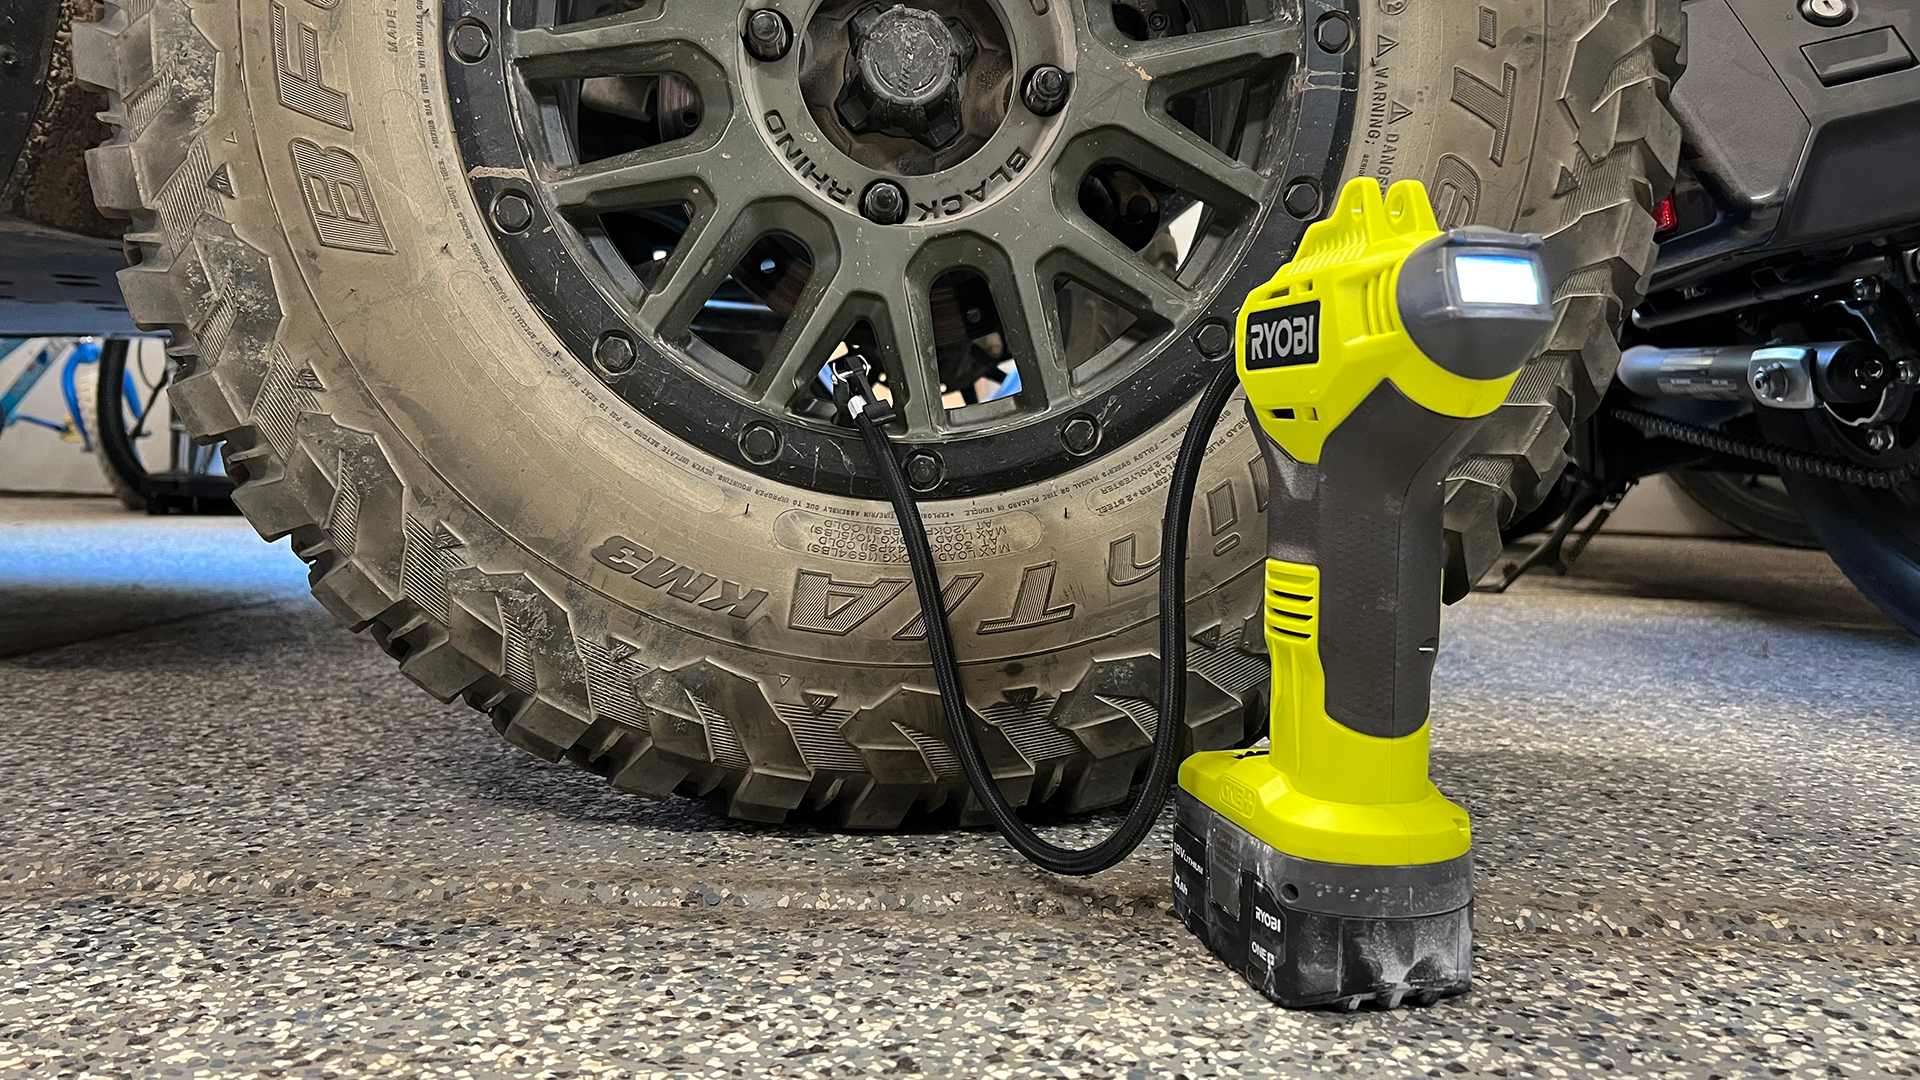 New and used Car Tire Inflators for sale